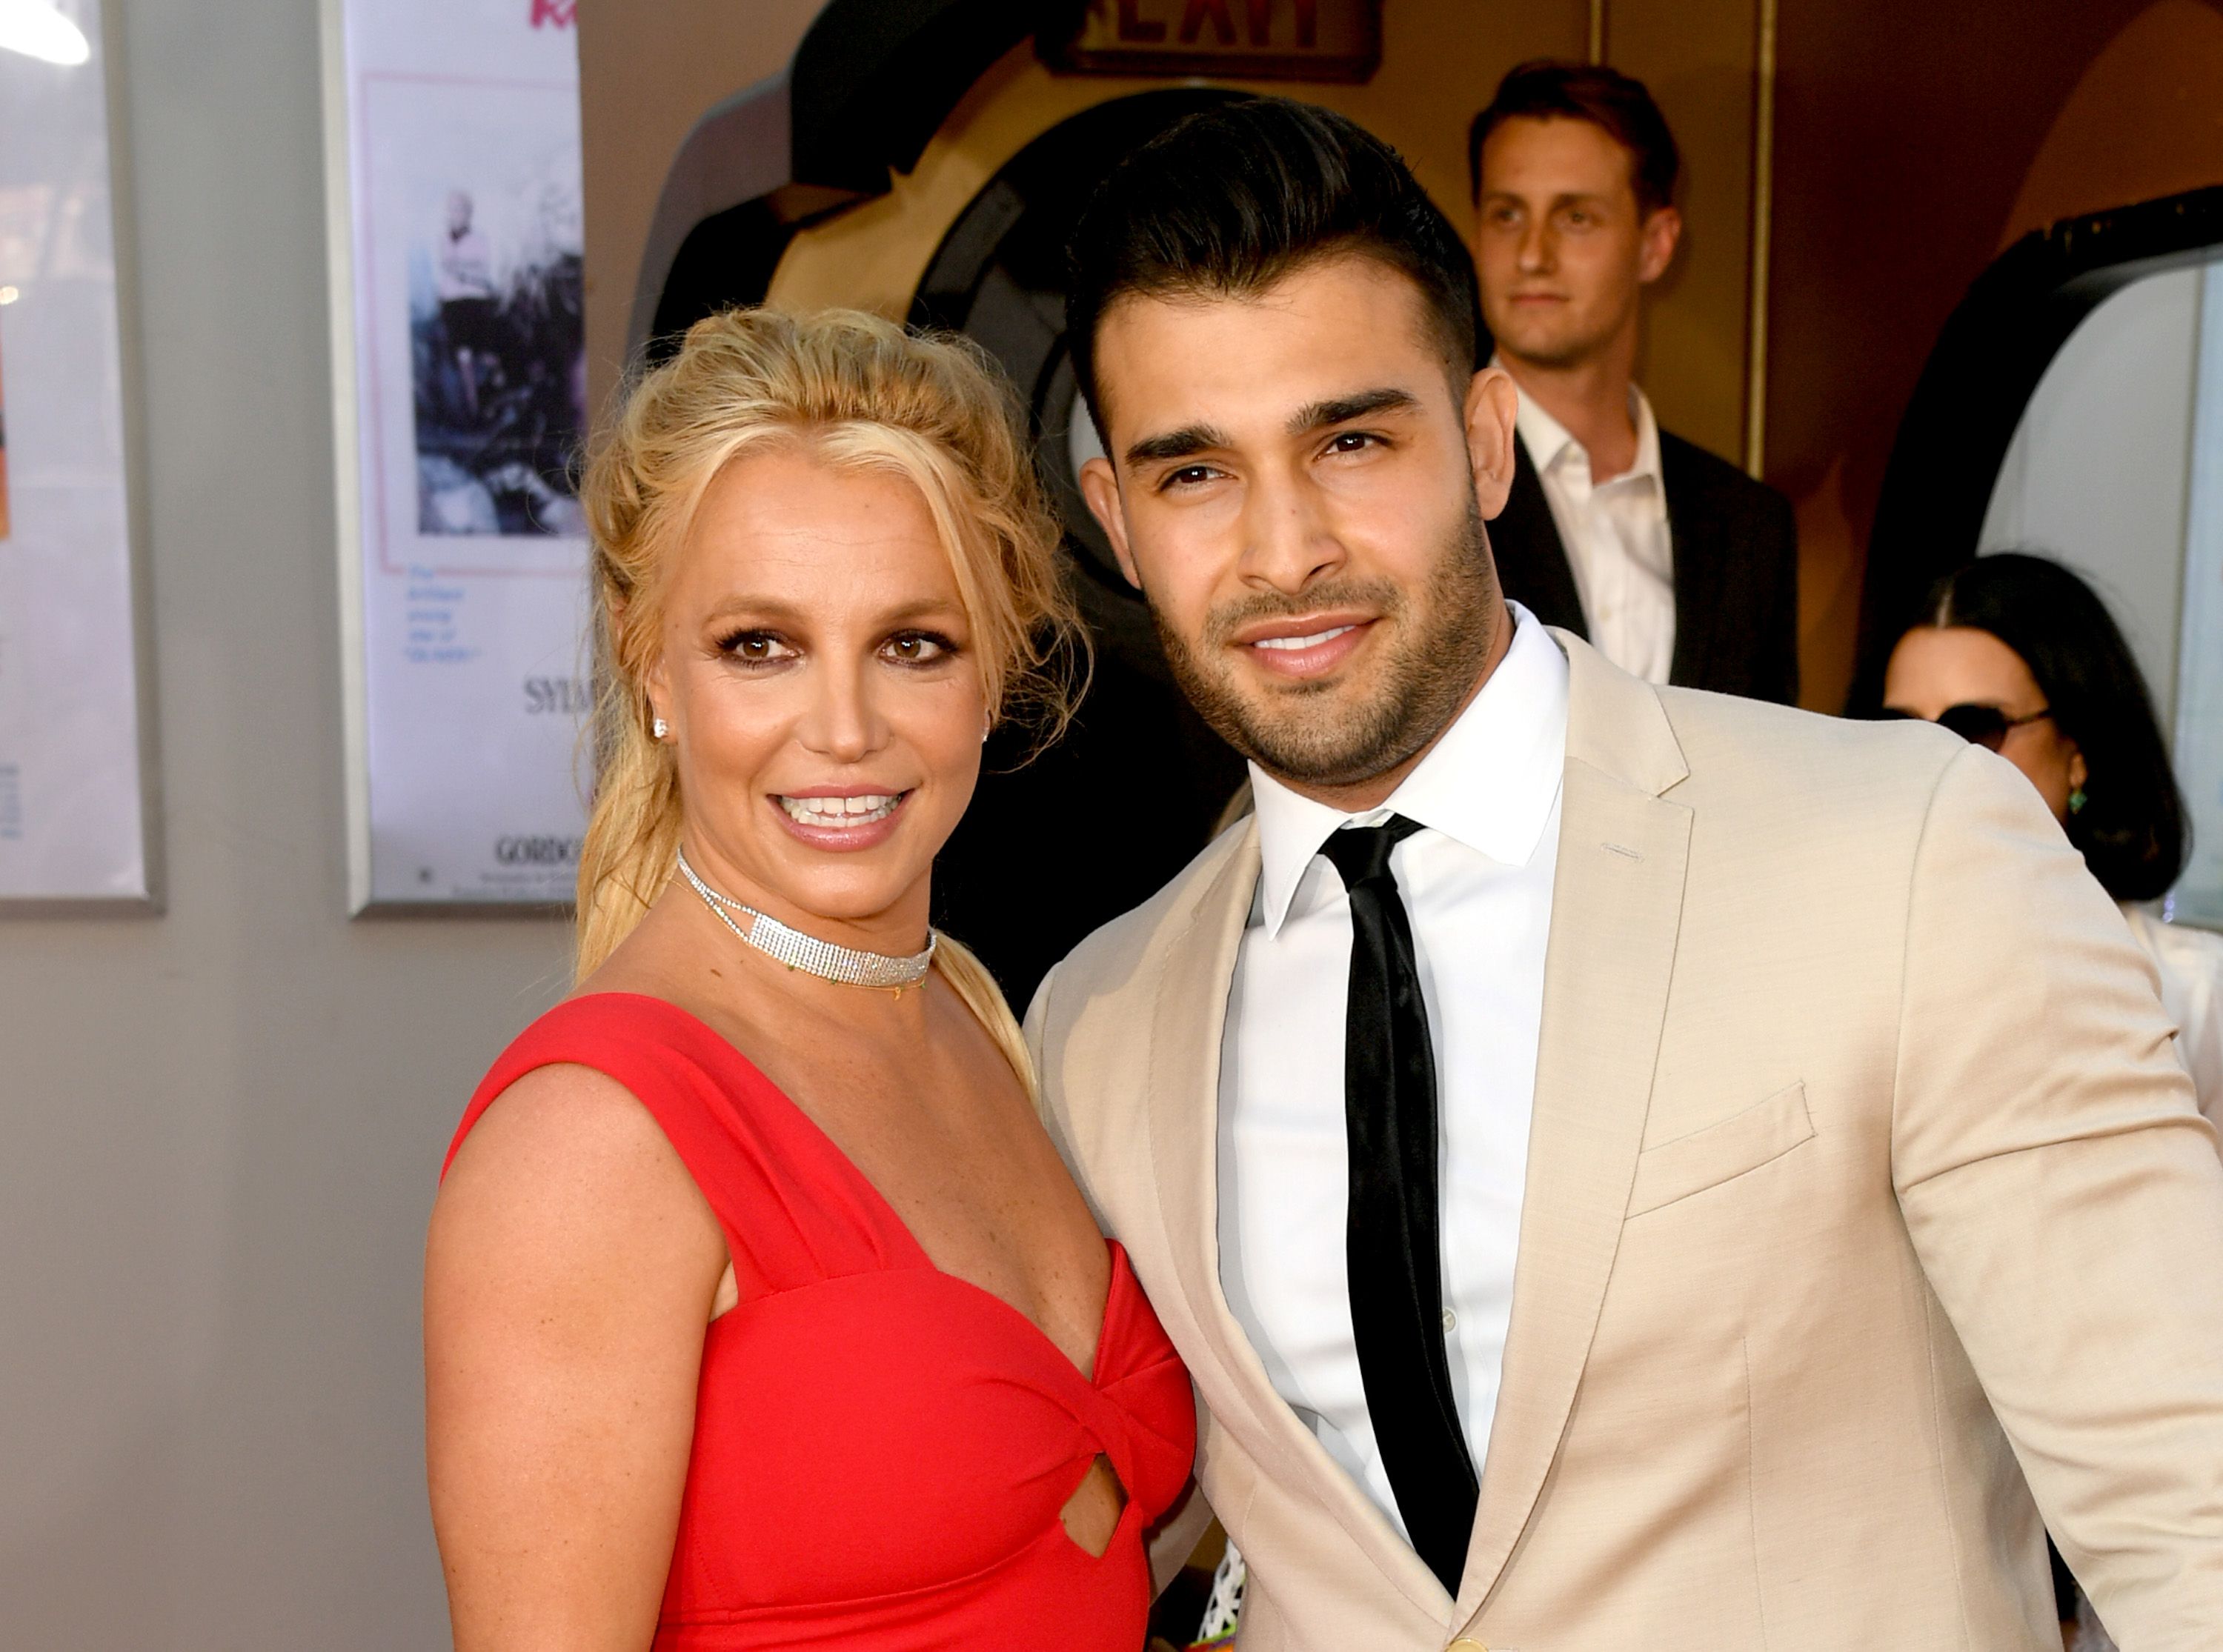 Britney Spears (L) and Sam Asghari at the premiere of Sony Pictures' "One Upon A Time...In Hollywood" at the Chinese Theatre on July 22, 2019 | Photo: Getty Images